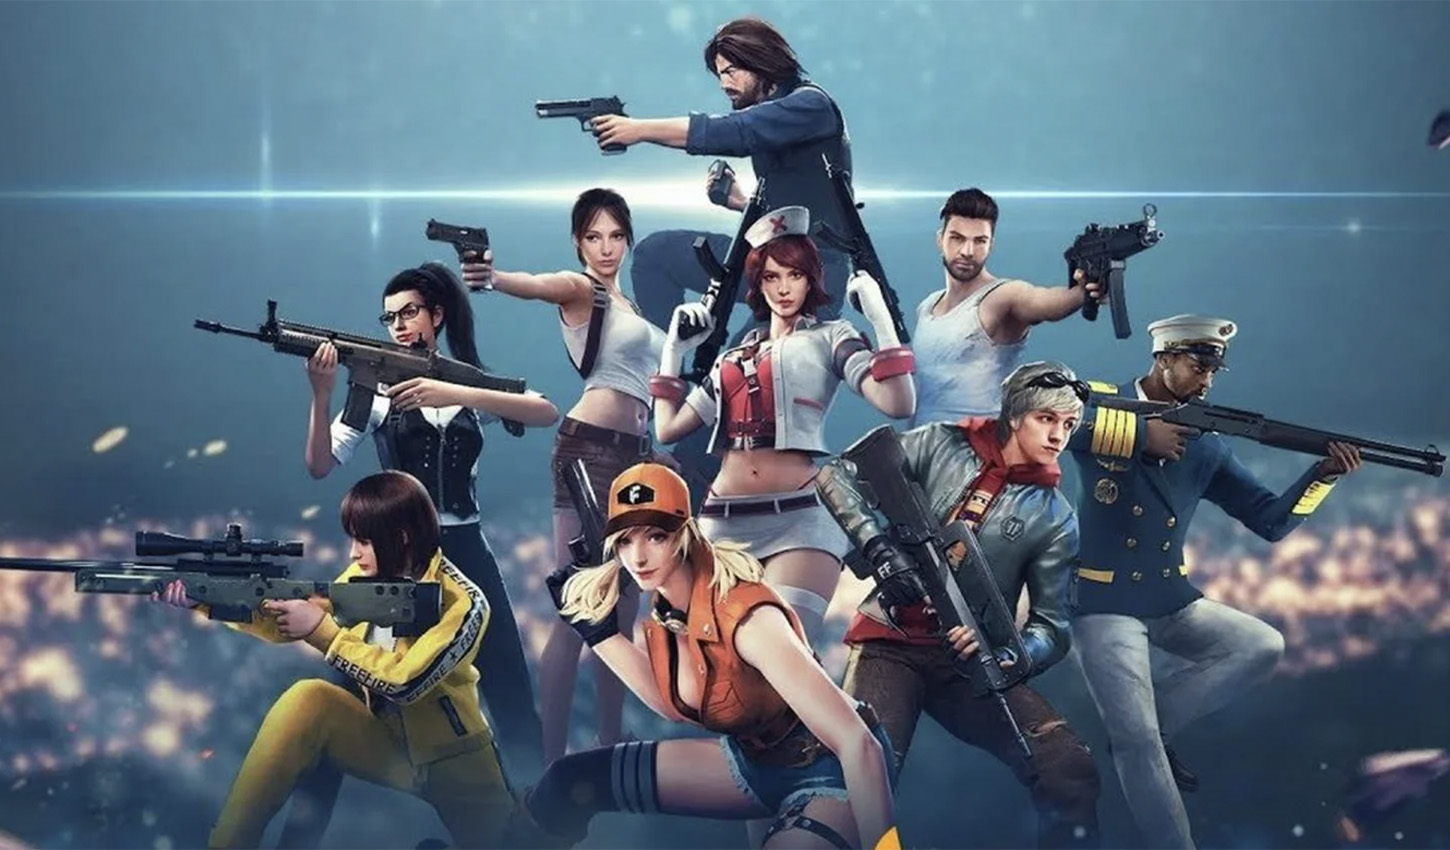 Best Android Battle Royale Games to Play on PC (FREE) 2021